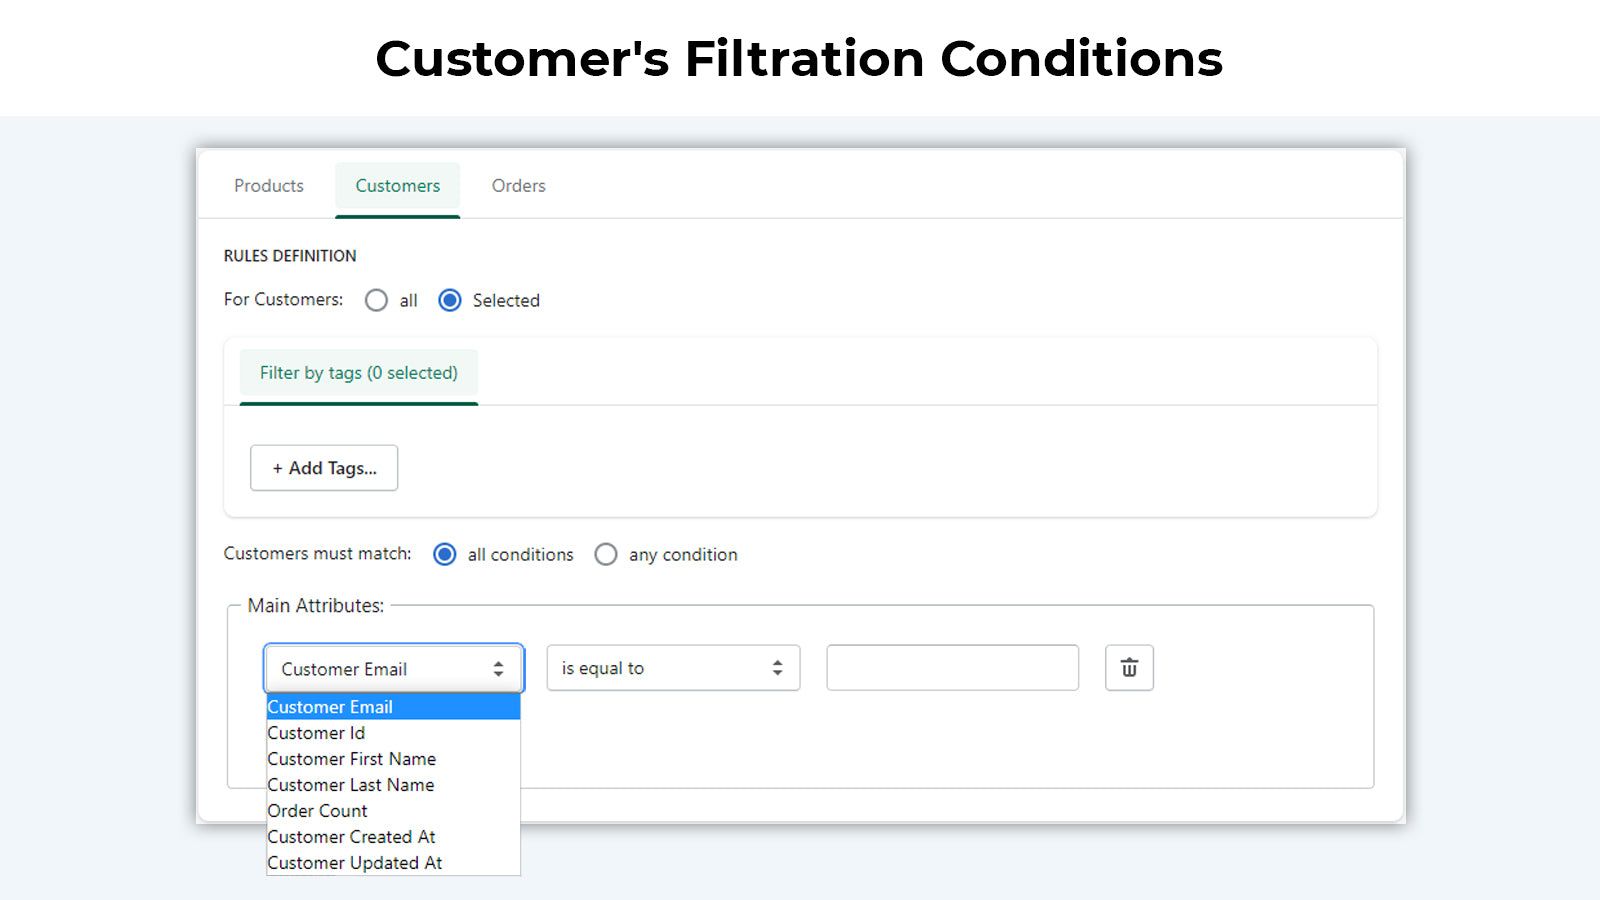 Order's Filtration Conditions